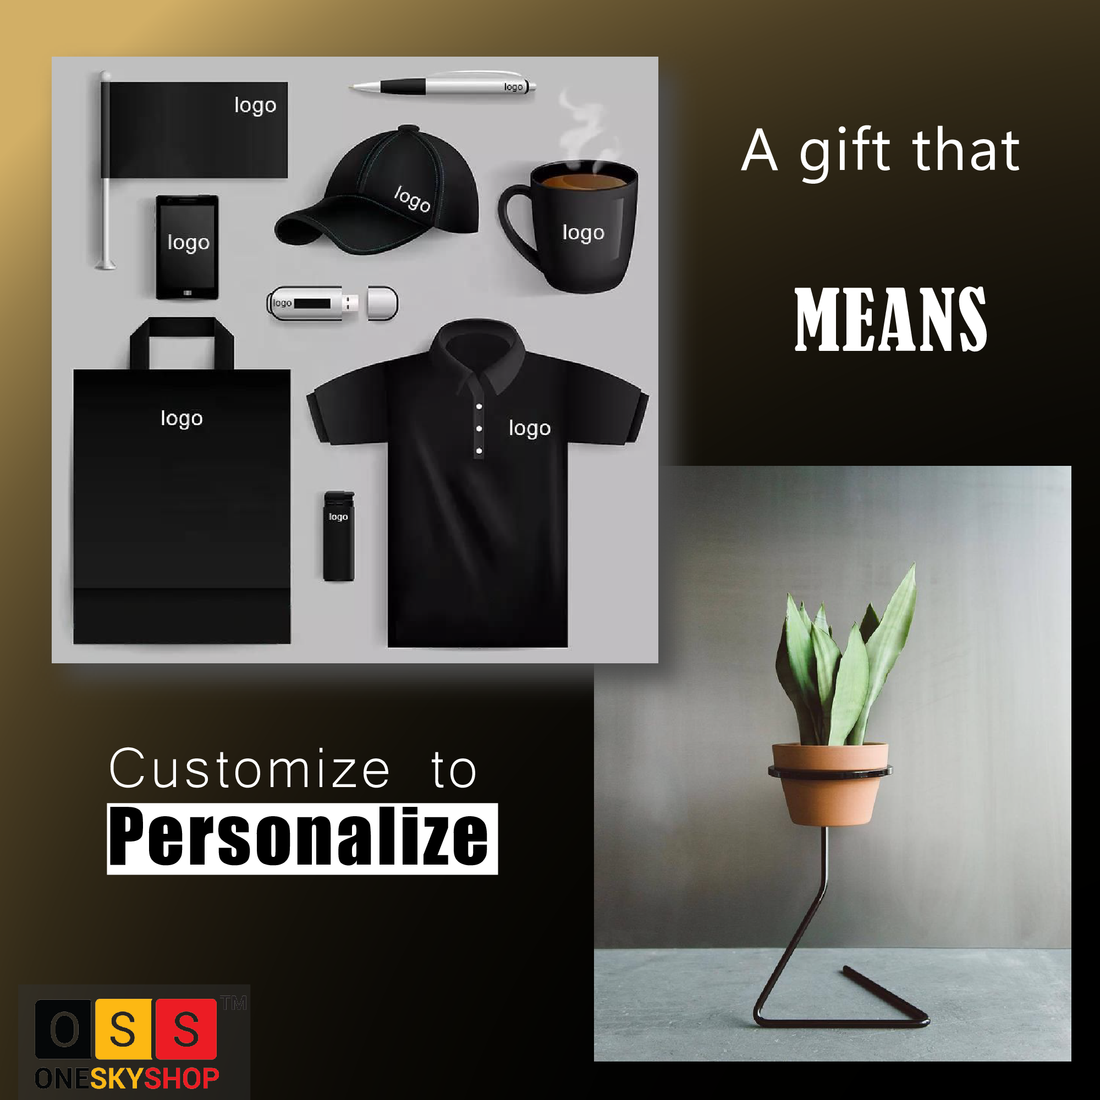 How To Personalize Corporate Gifts To Make Them More Meaningful?